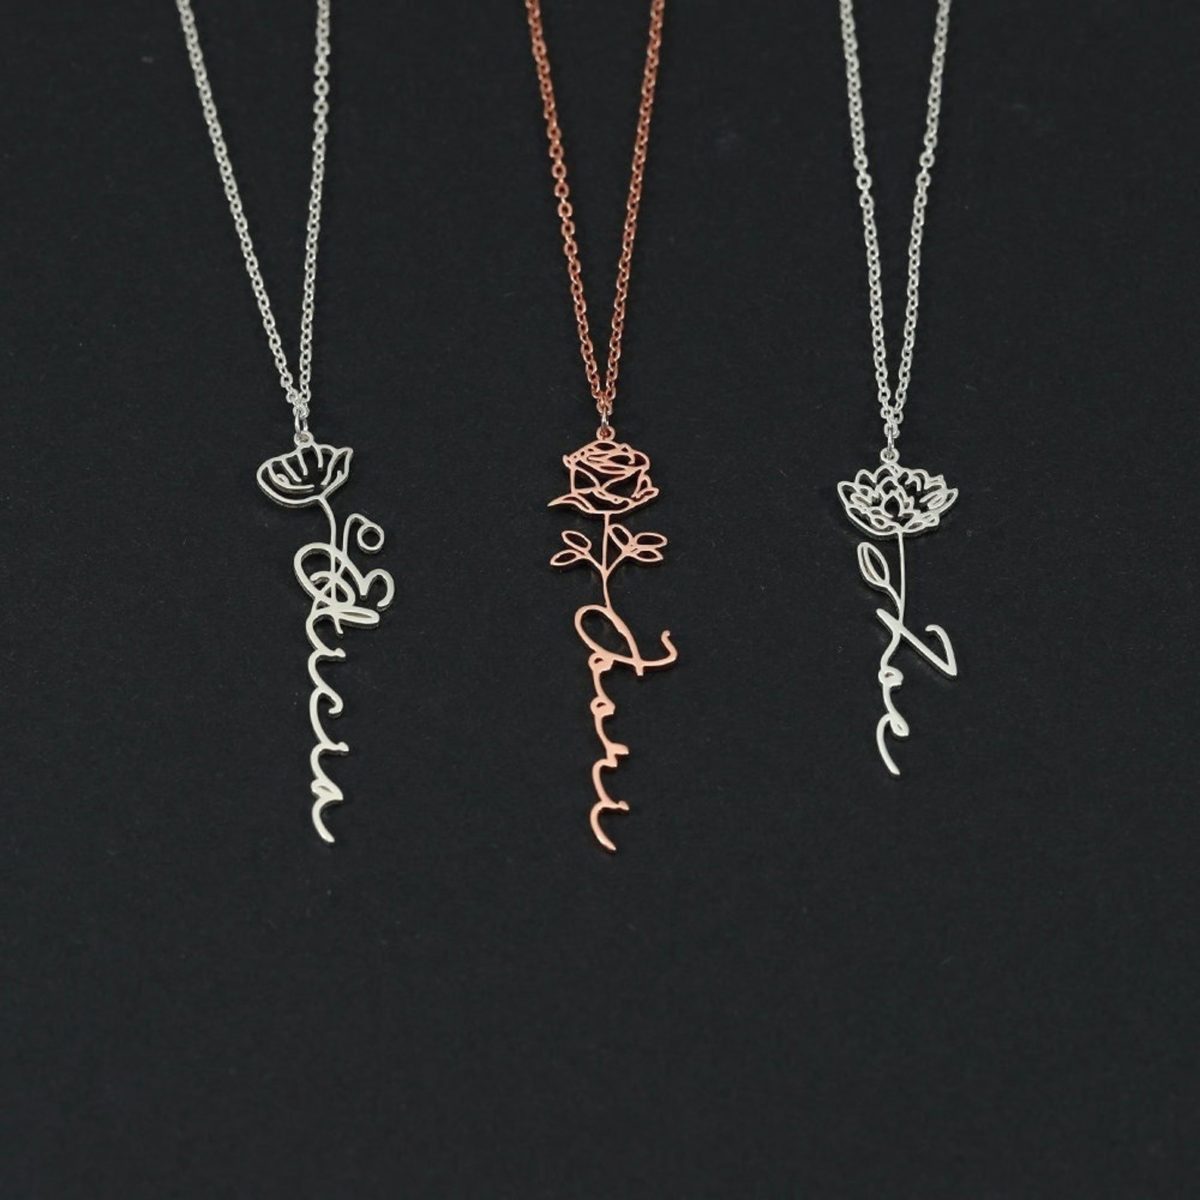 10 Customized Name Necklace Gifts